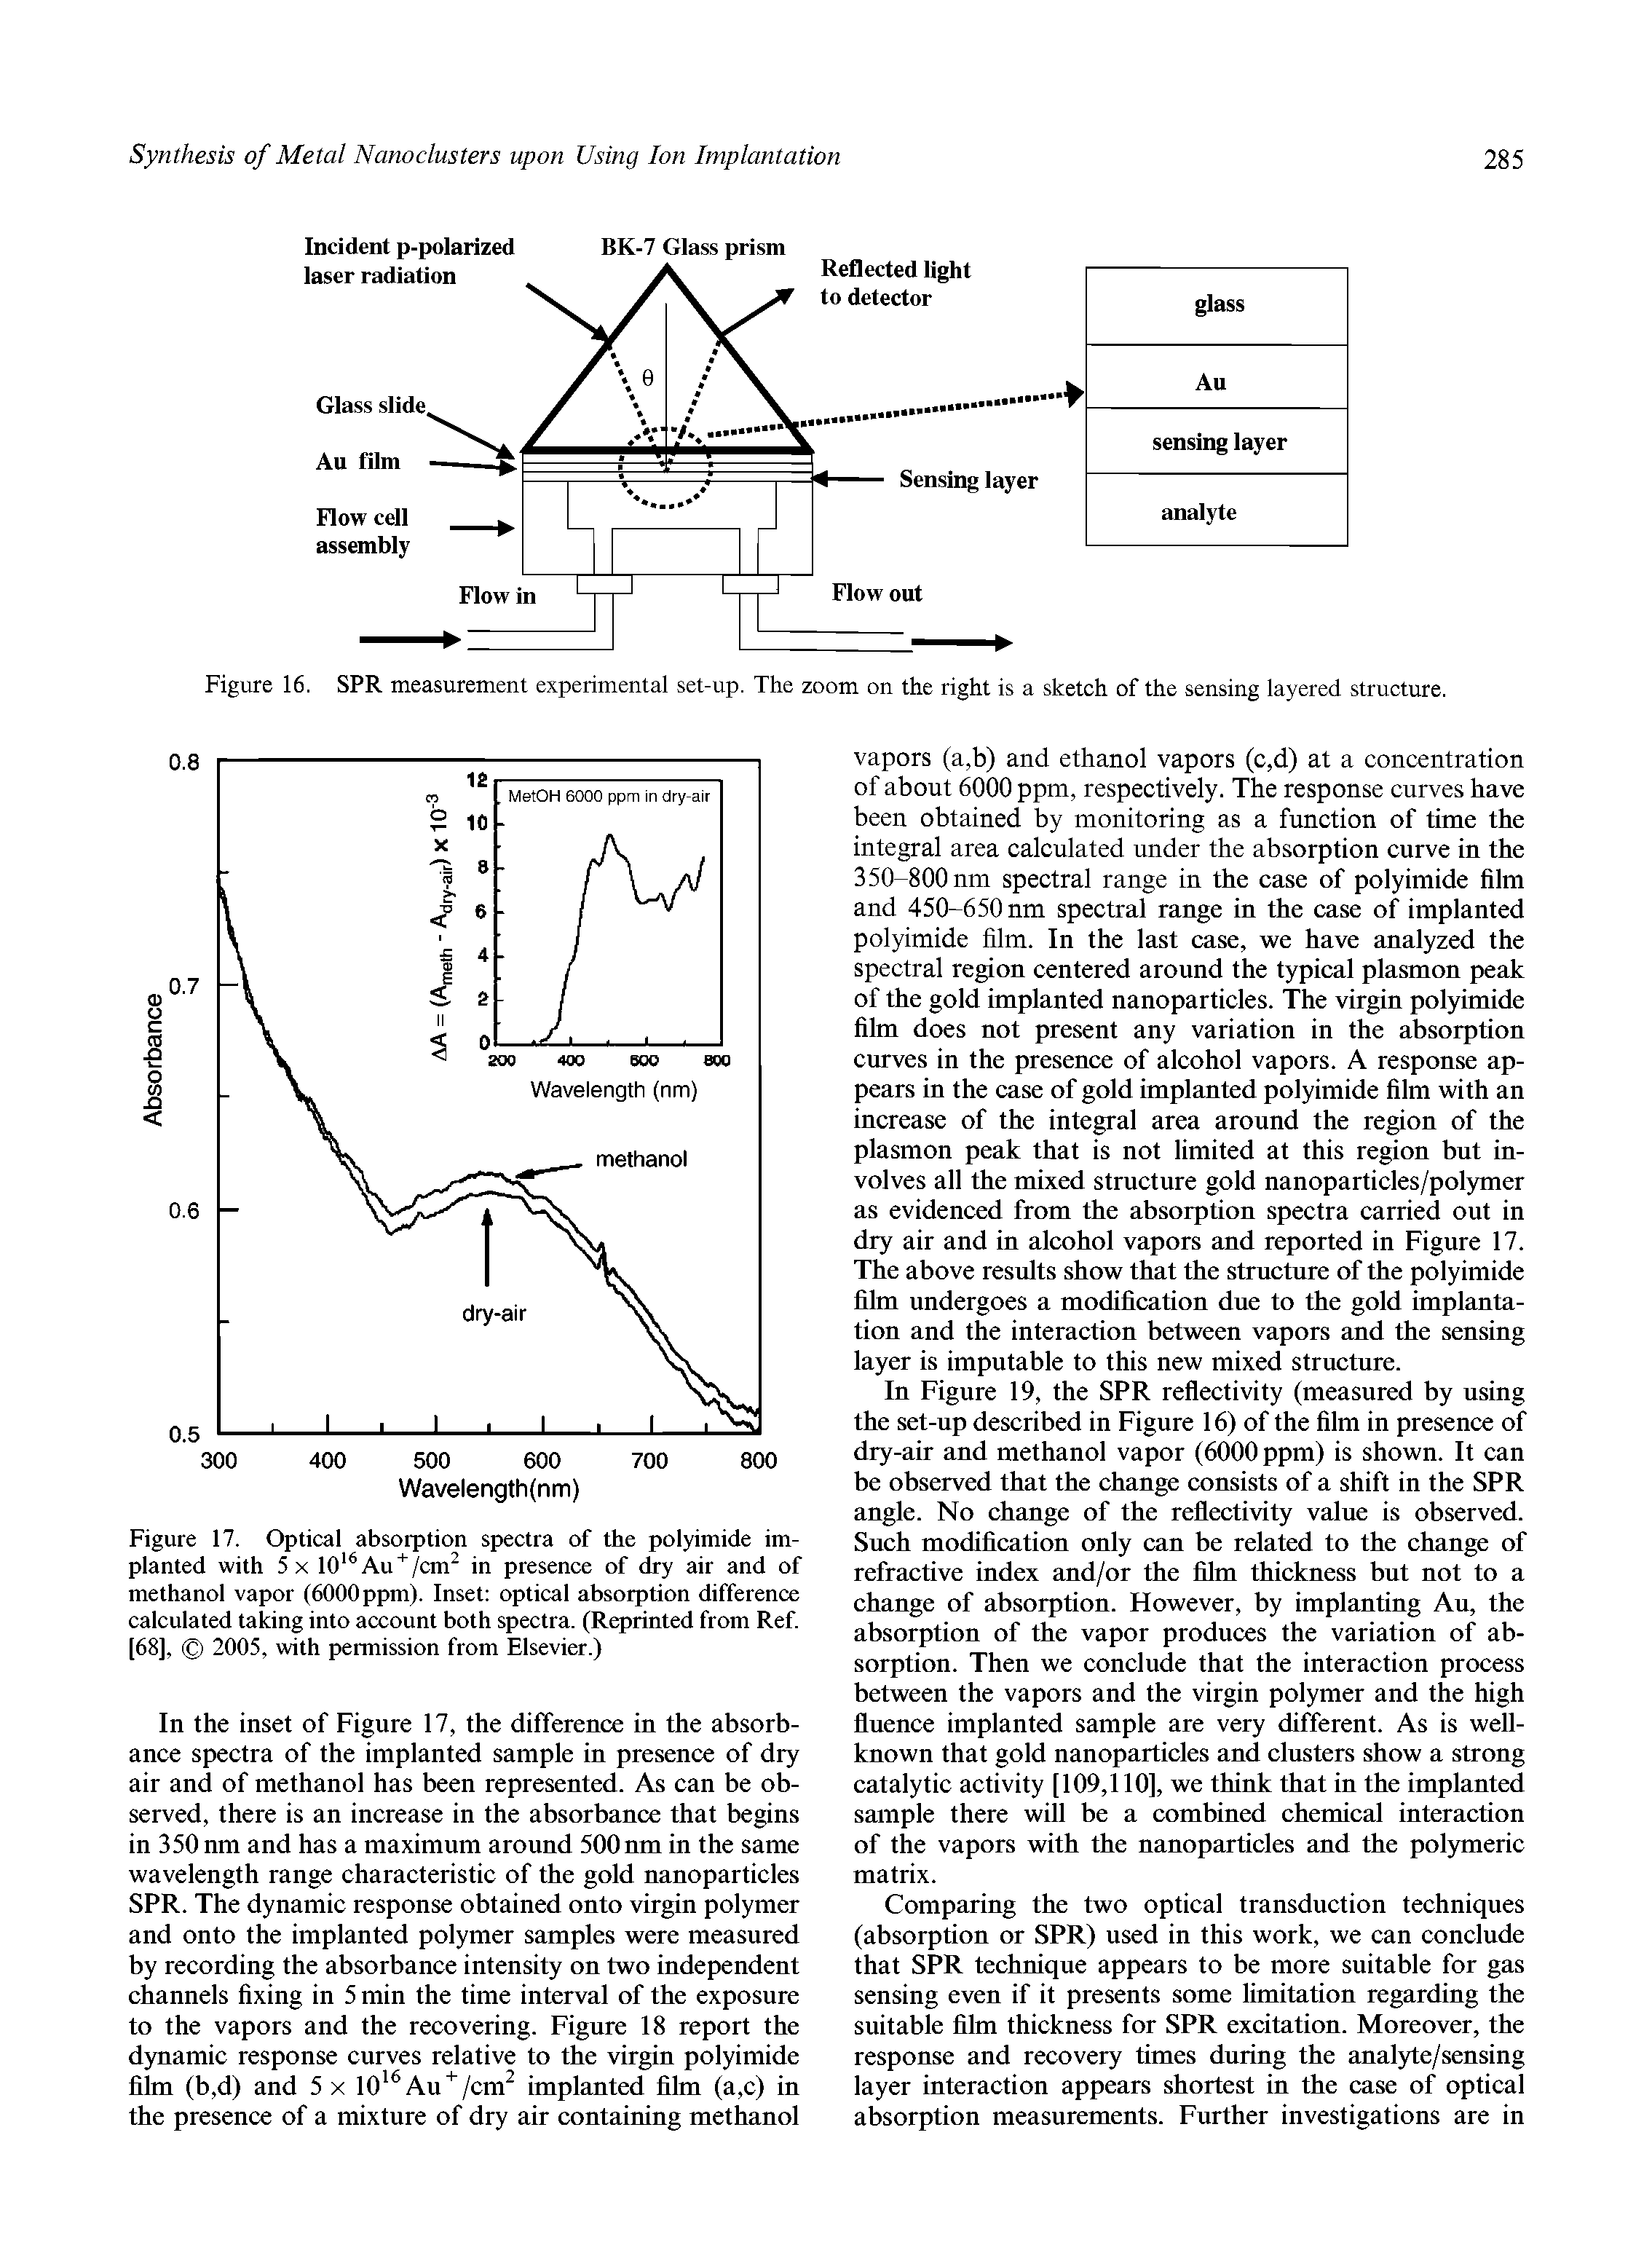 Figure 17. Optical absorption spectra of the polyimide implanted with 5x 10 Au m in presence of dry air and of methanol vapor (6000 ppm). Inset optical absorption difference calculated taking into account both spectra. (Reprinted from Ref. [68], 2005, with permission from Elsevier.)...